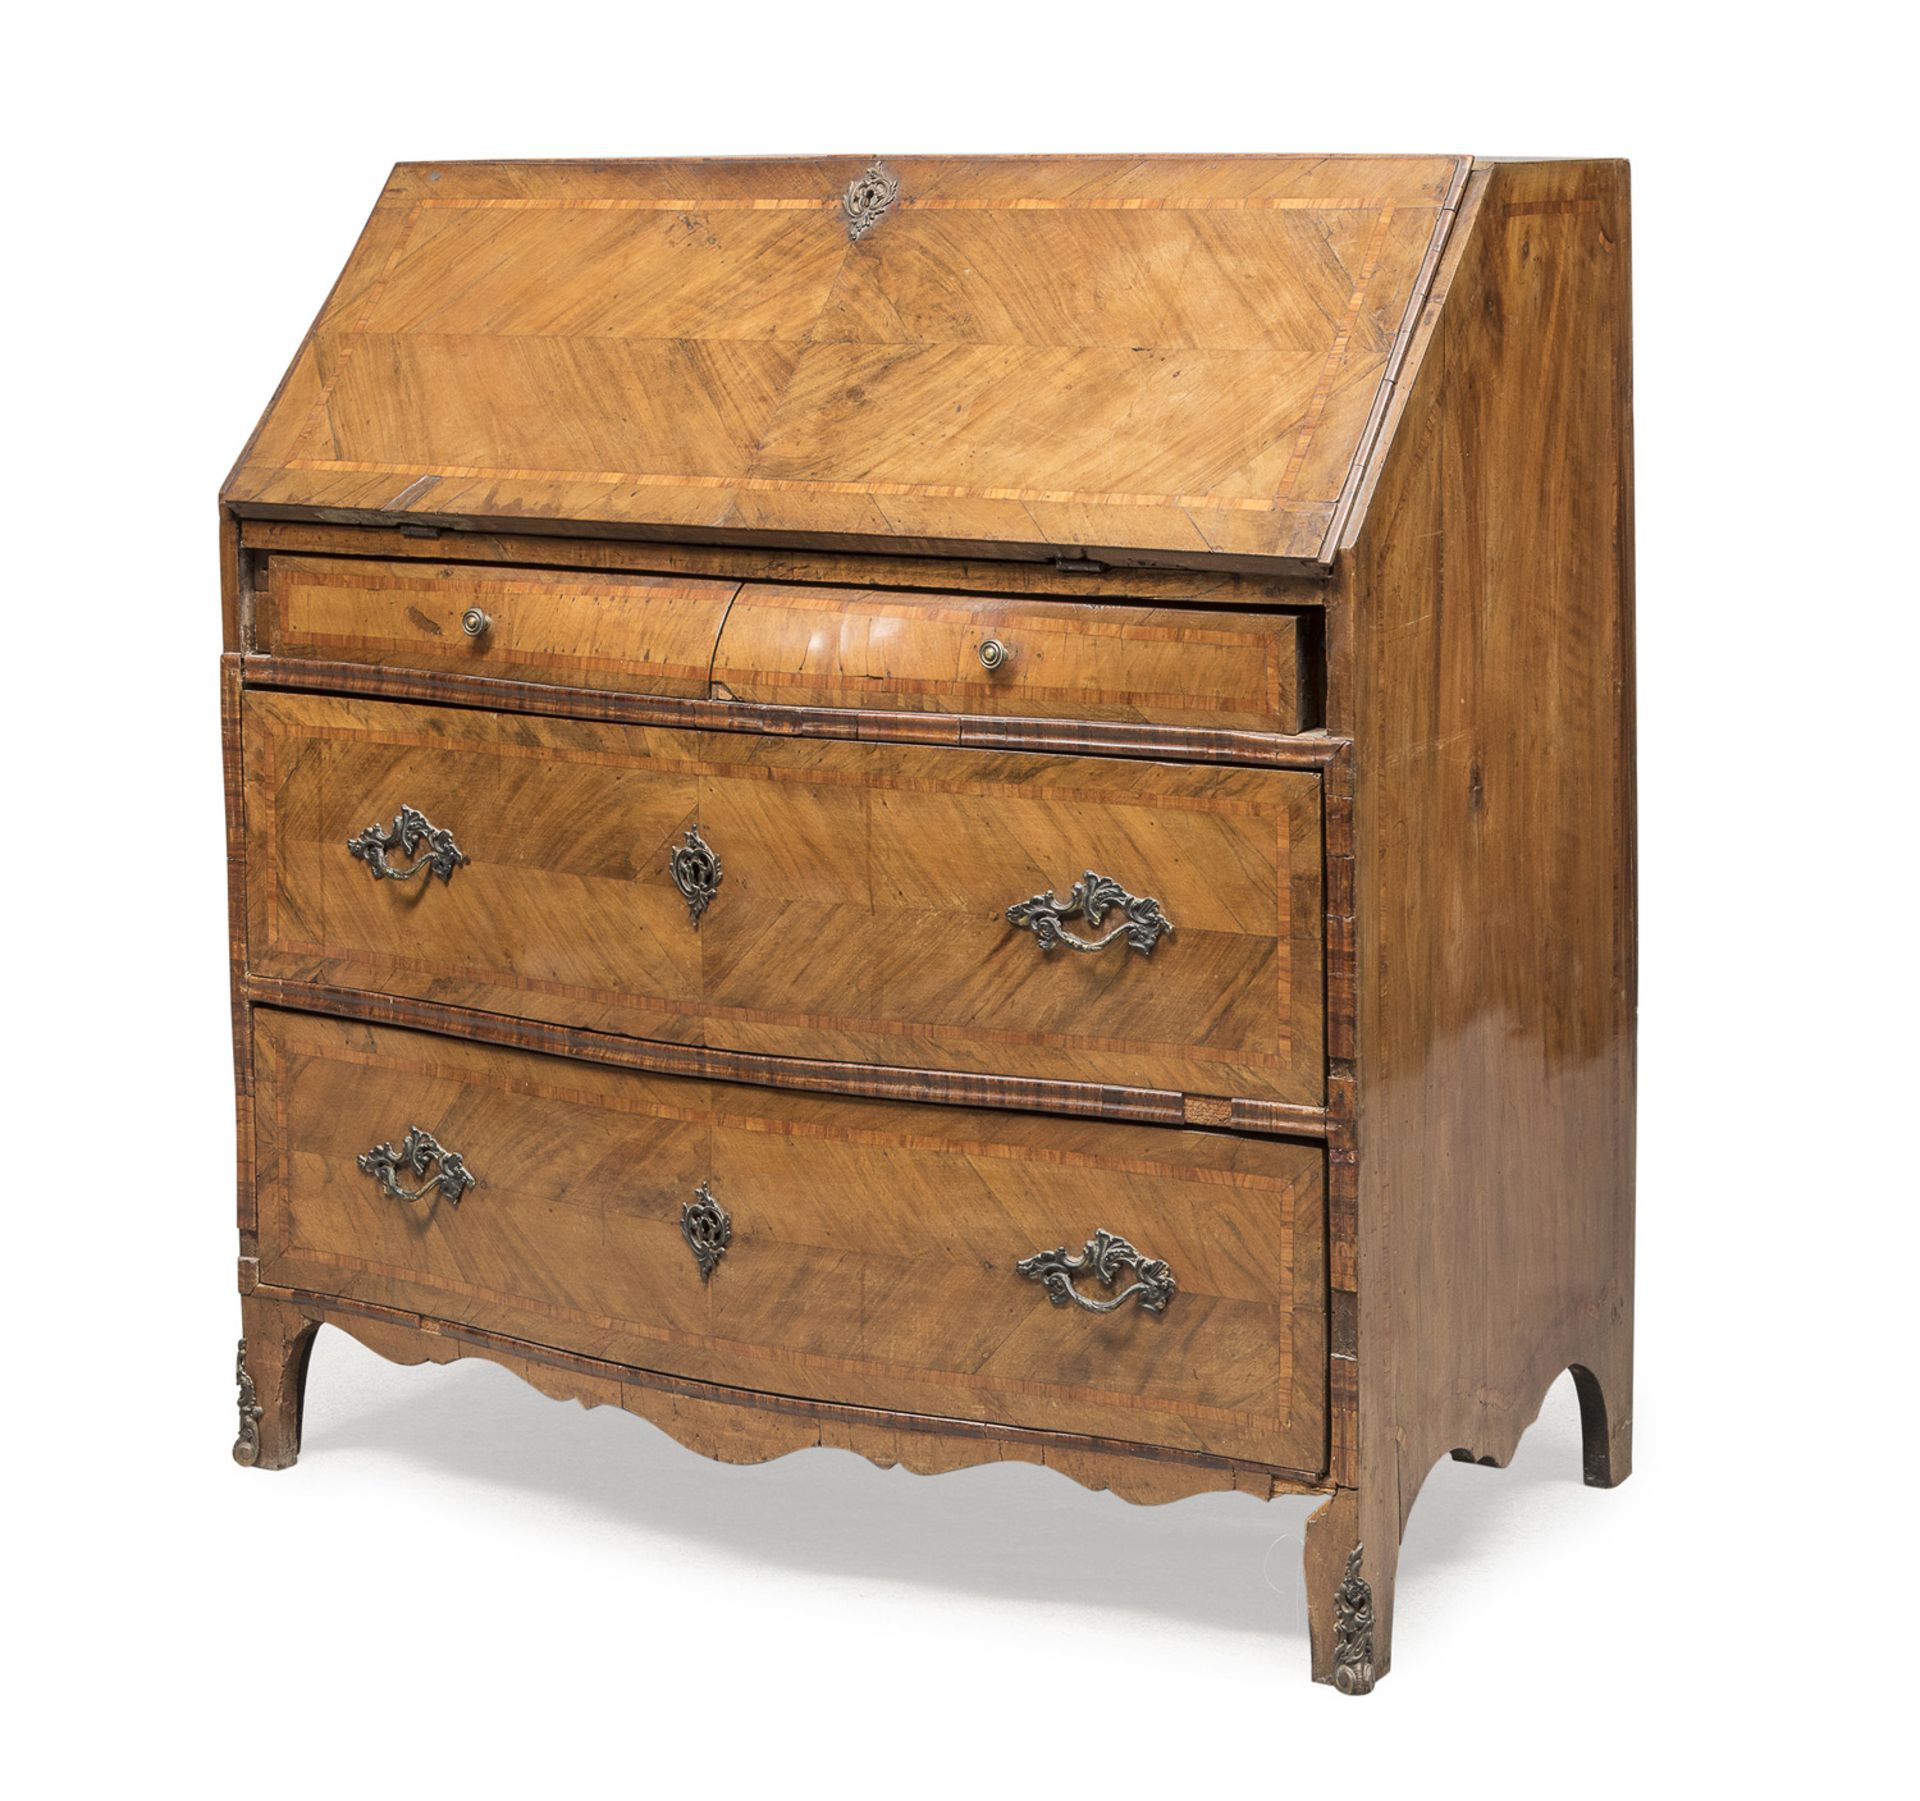 DROP-LEAF CHEST OF DRAWERS IN CHERRY GENOA 18TH CENTURY